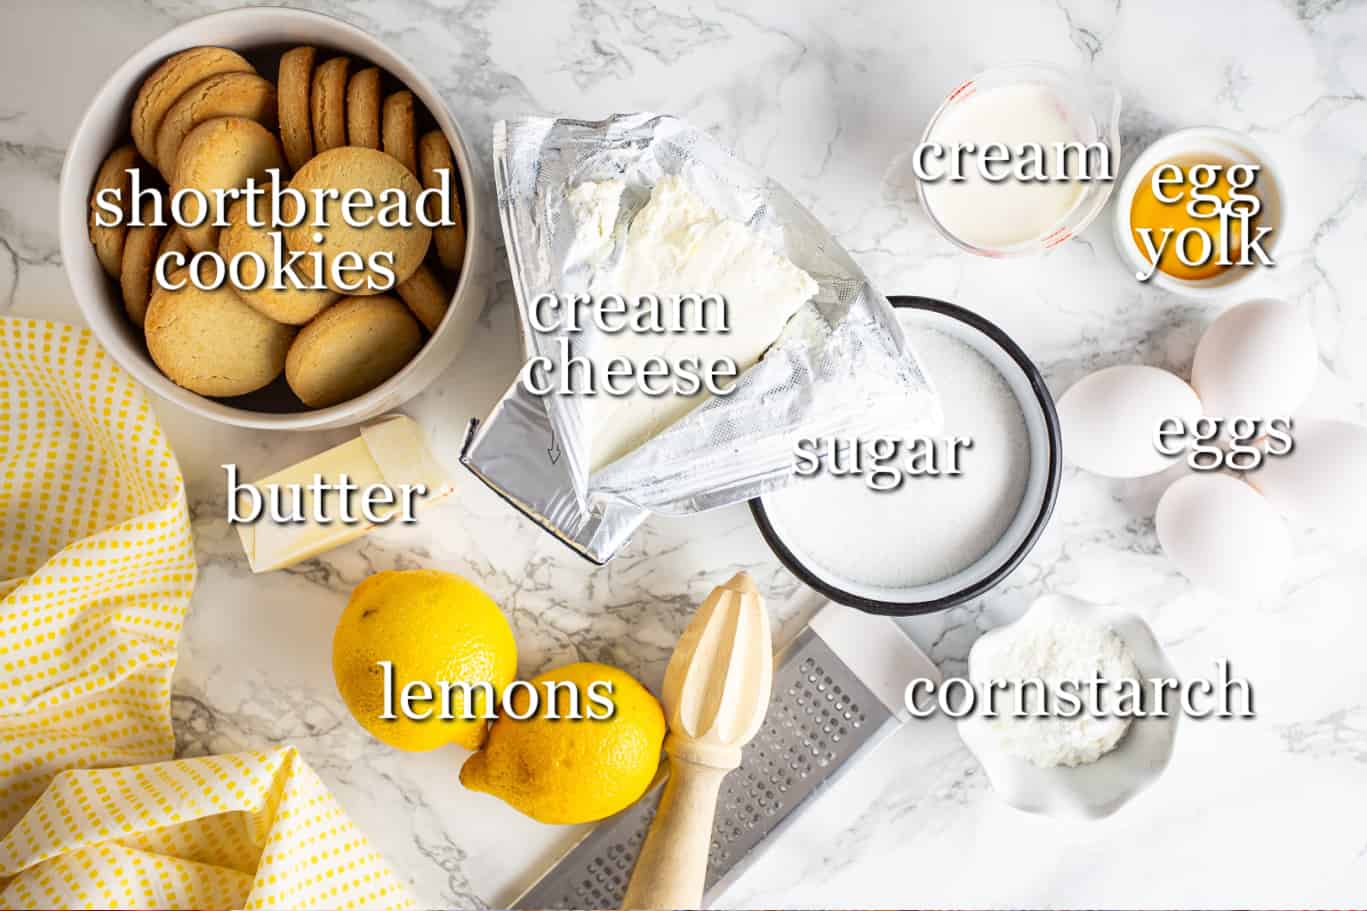 Ingredients for making lemon cheesecake, with text labels.